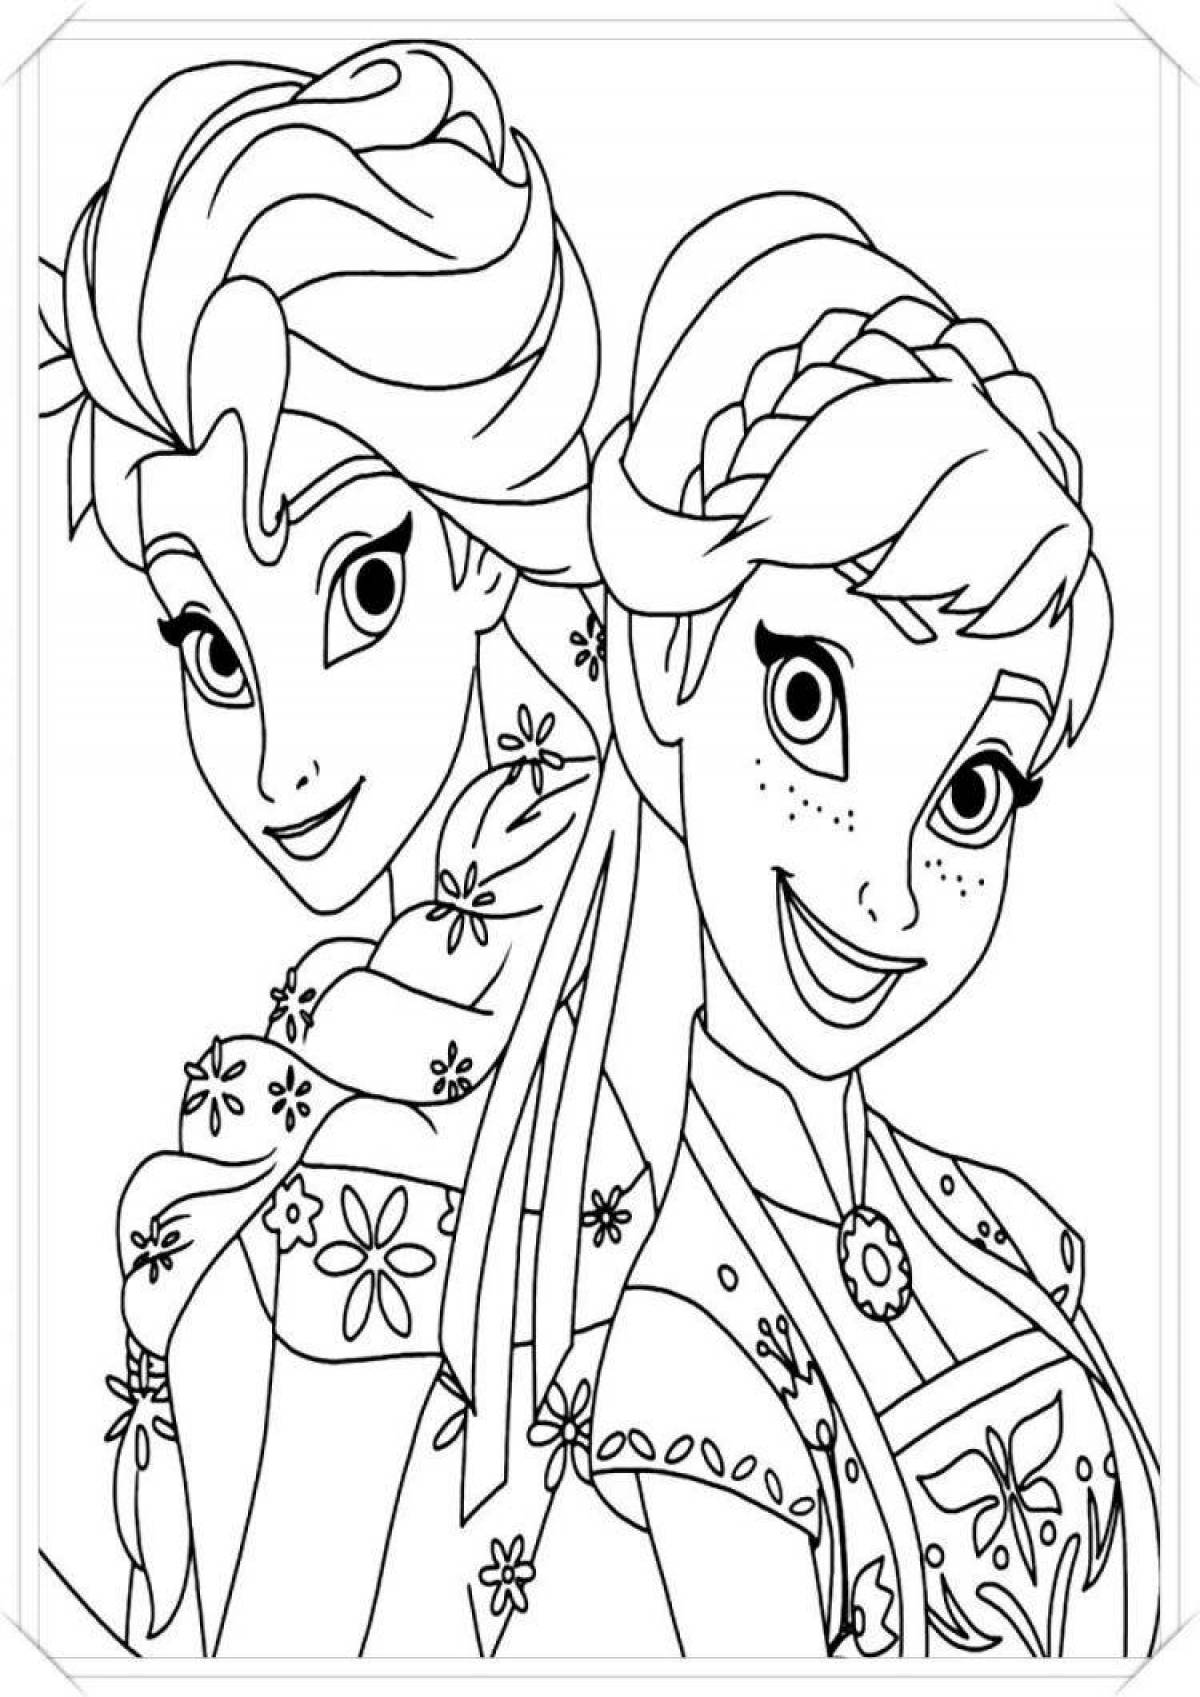 Coloring funny cartoon sisters